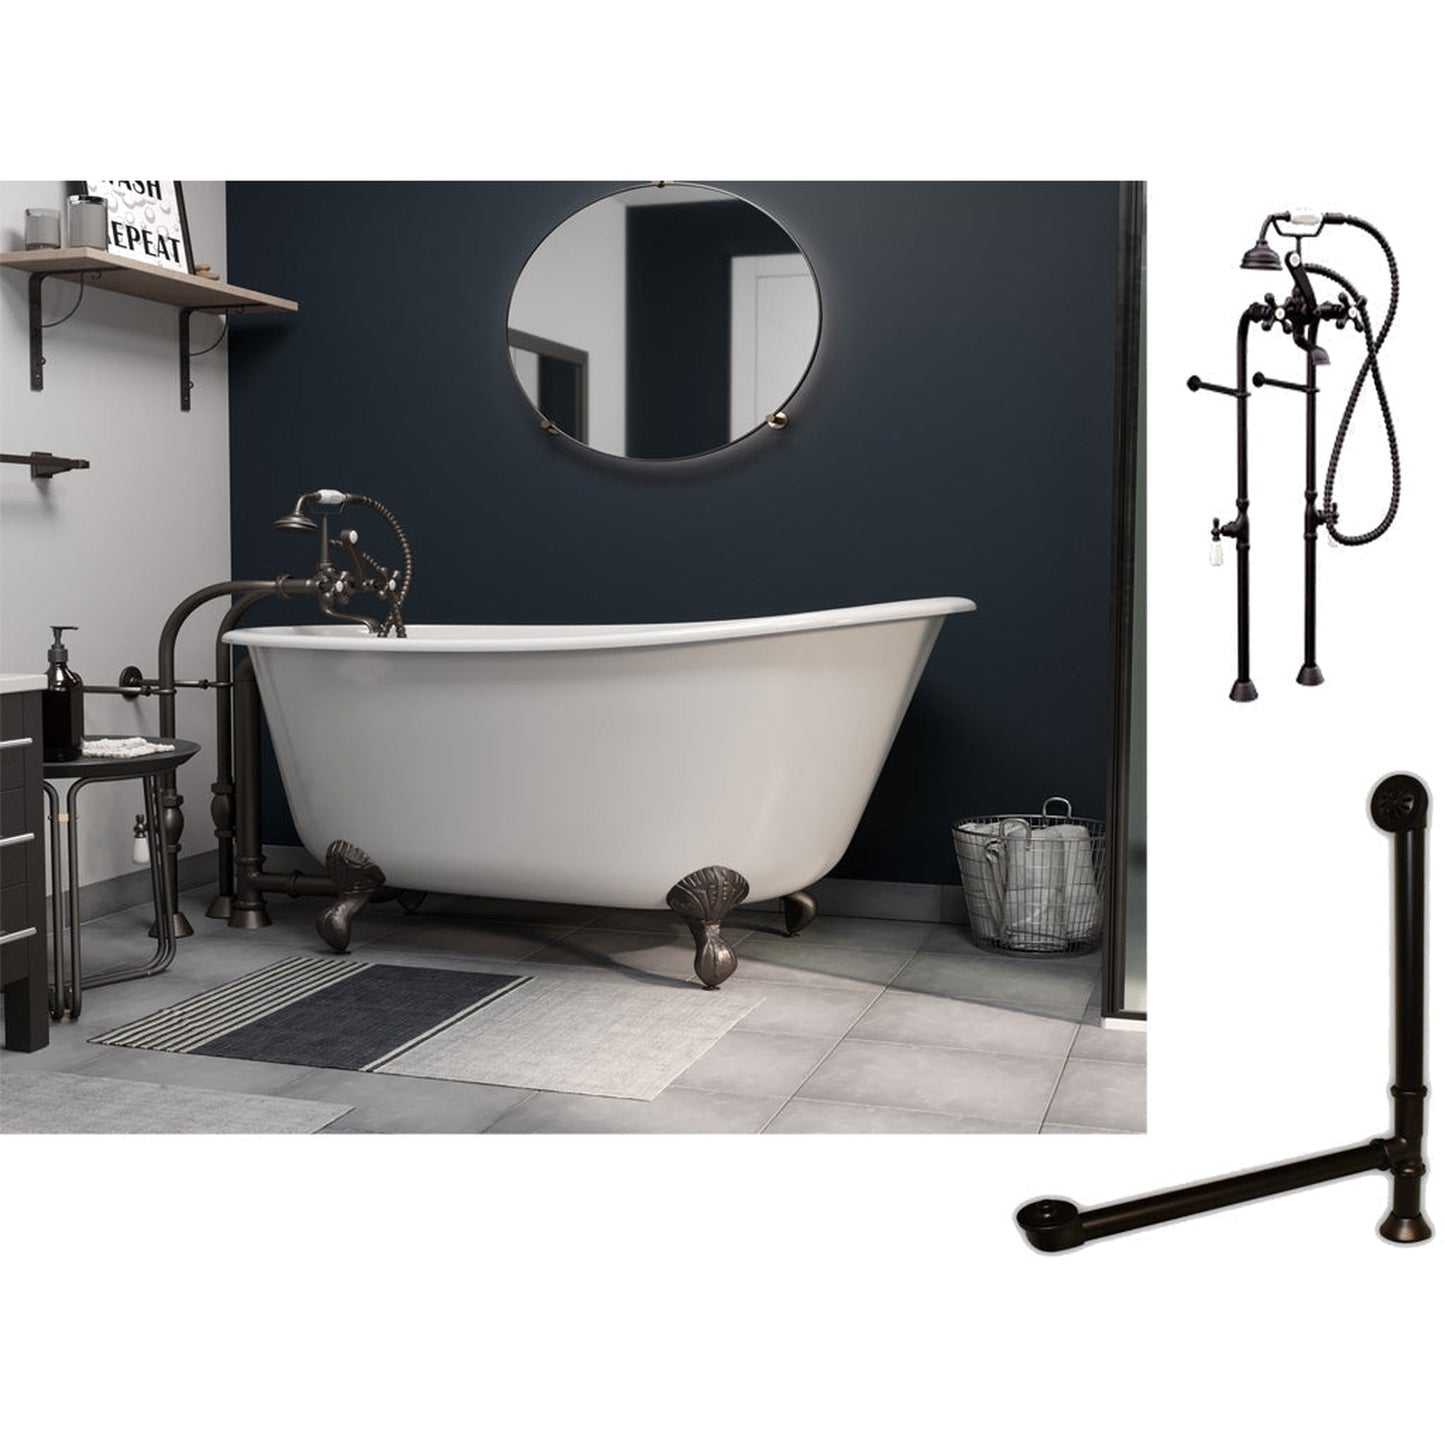 Cambridge Plumbing 58" White Cast Iron Swedish Single Slipper Clawfoot Bathtub With No Deck Holes And Complete Plumbing Package Including Modern Floor Mounted British Telephone Faucet, Drain And Overflow Assembly In Polished Chrome